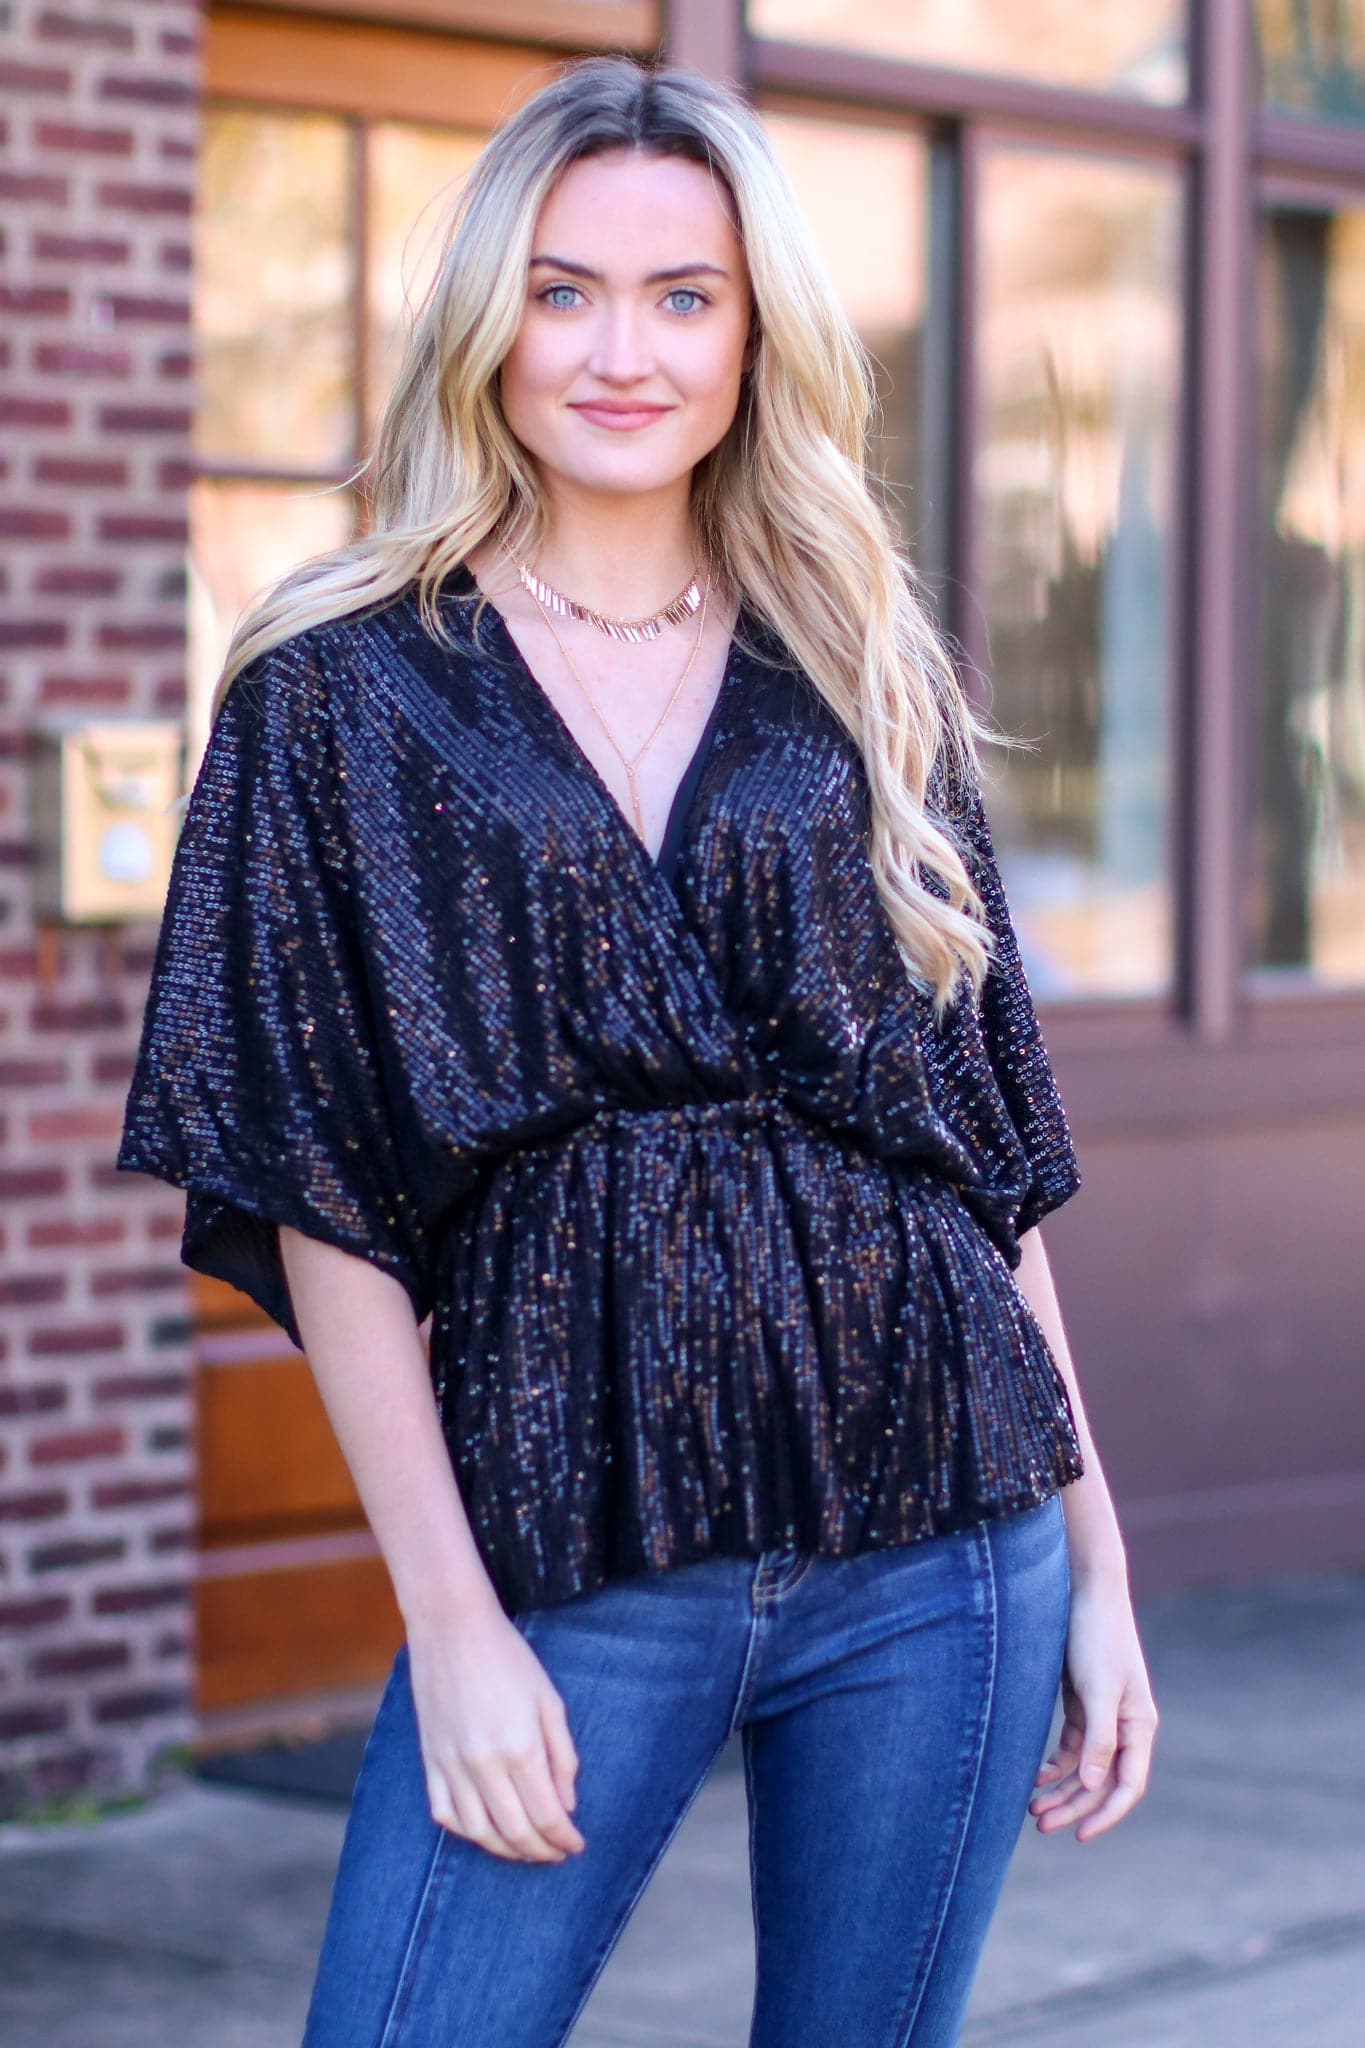  Sequins of Events V-Neck Top - FINAL SALE - Madison and Mallory